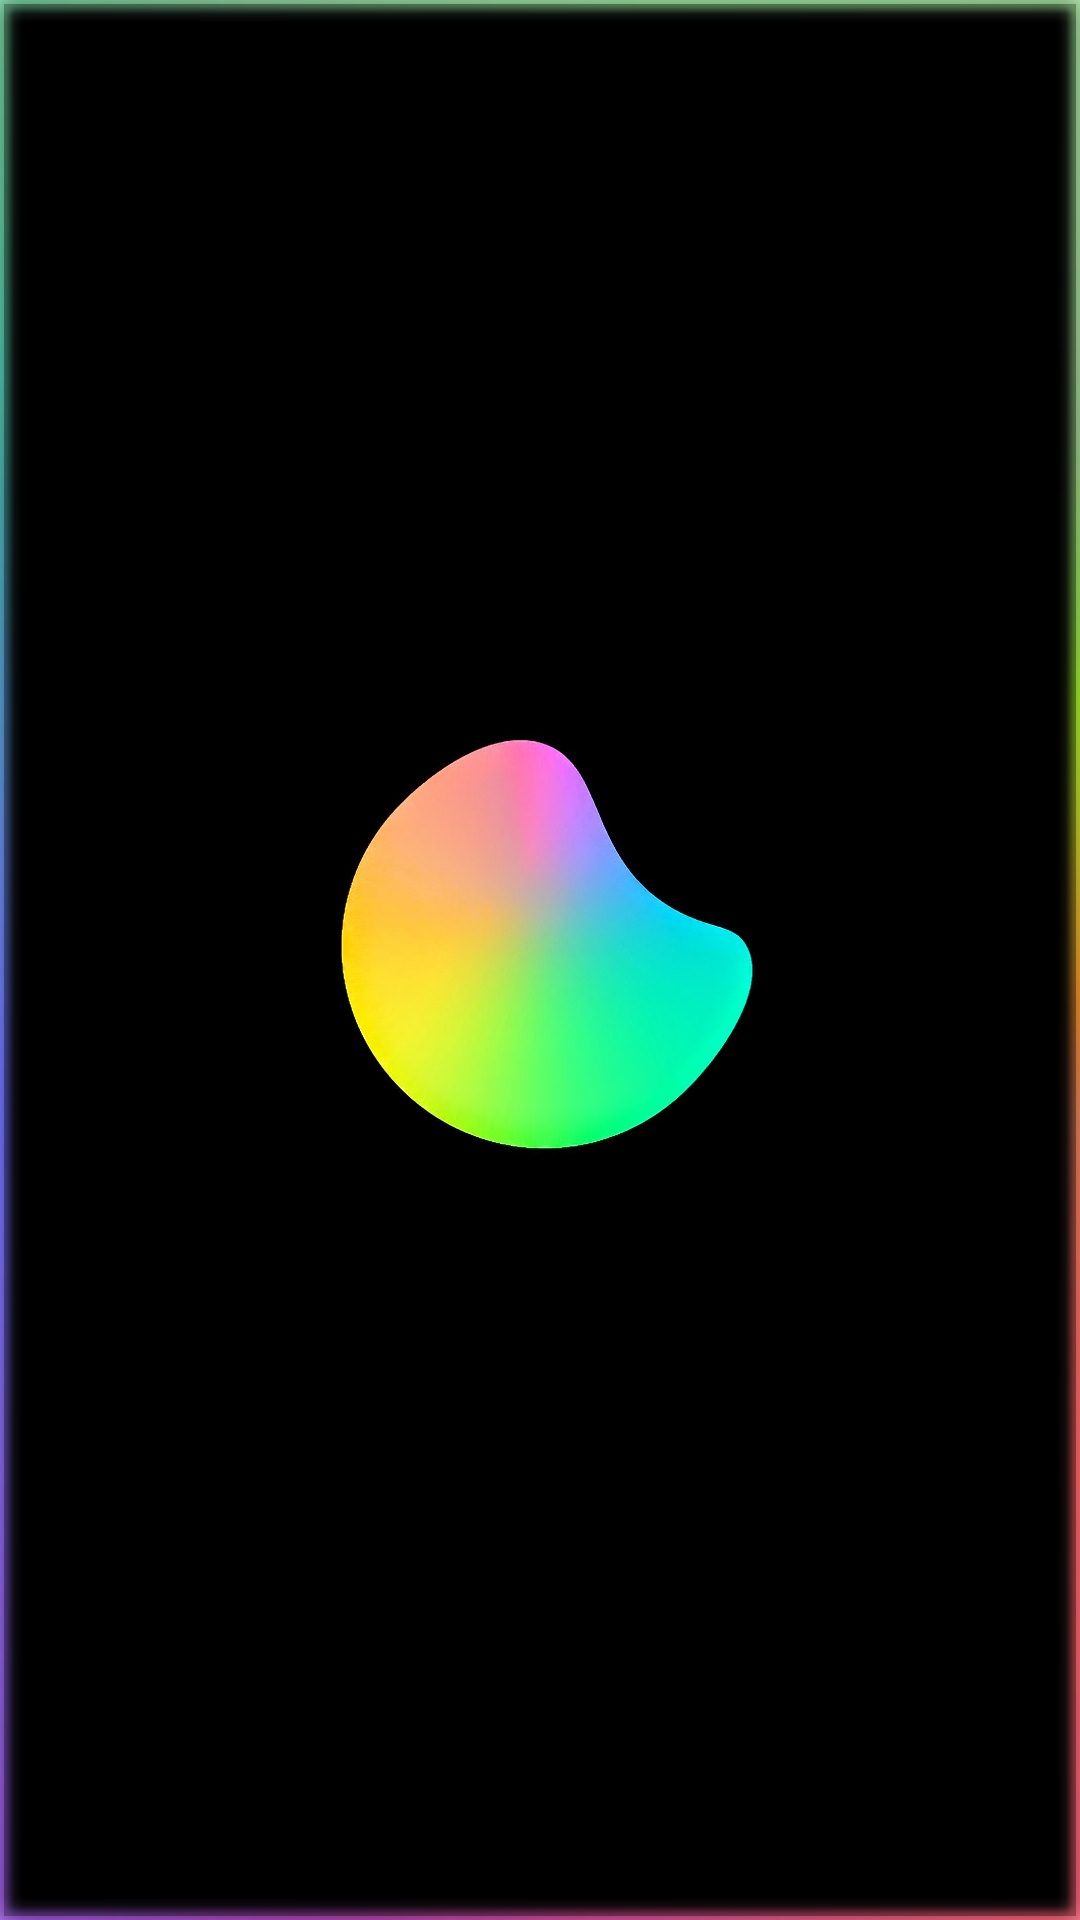 Combined two amoled and colorful .myfavwallpaper.com